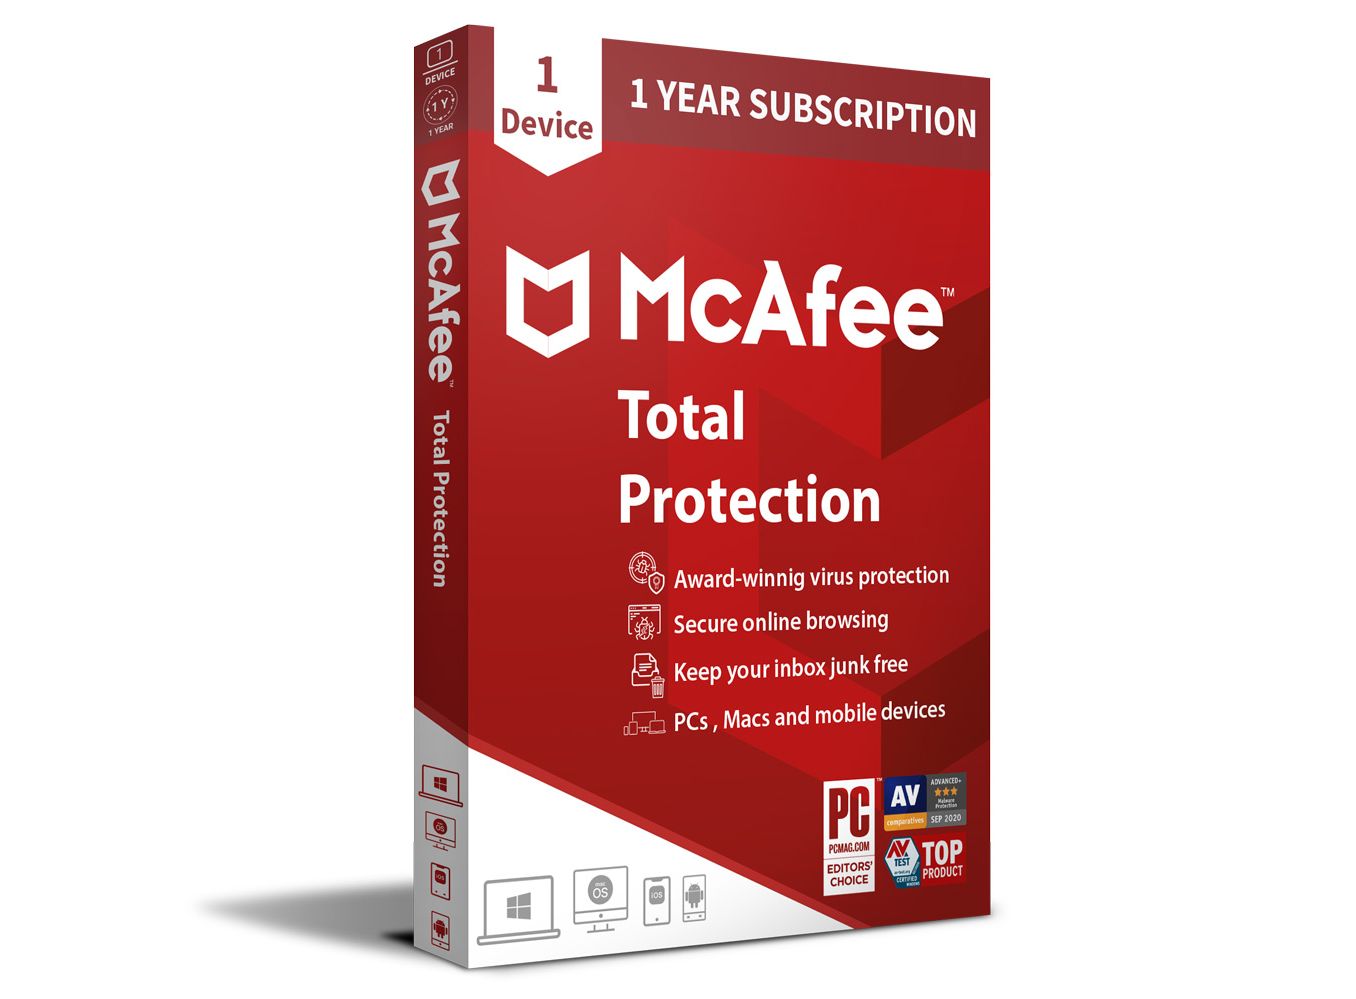 McAfee Total Protection 110 Device Best Security at the Best Price!